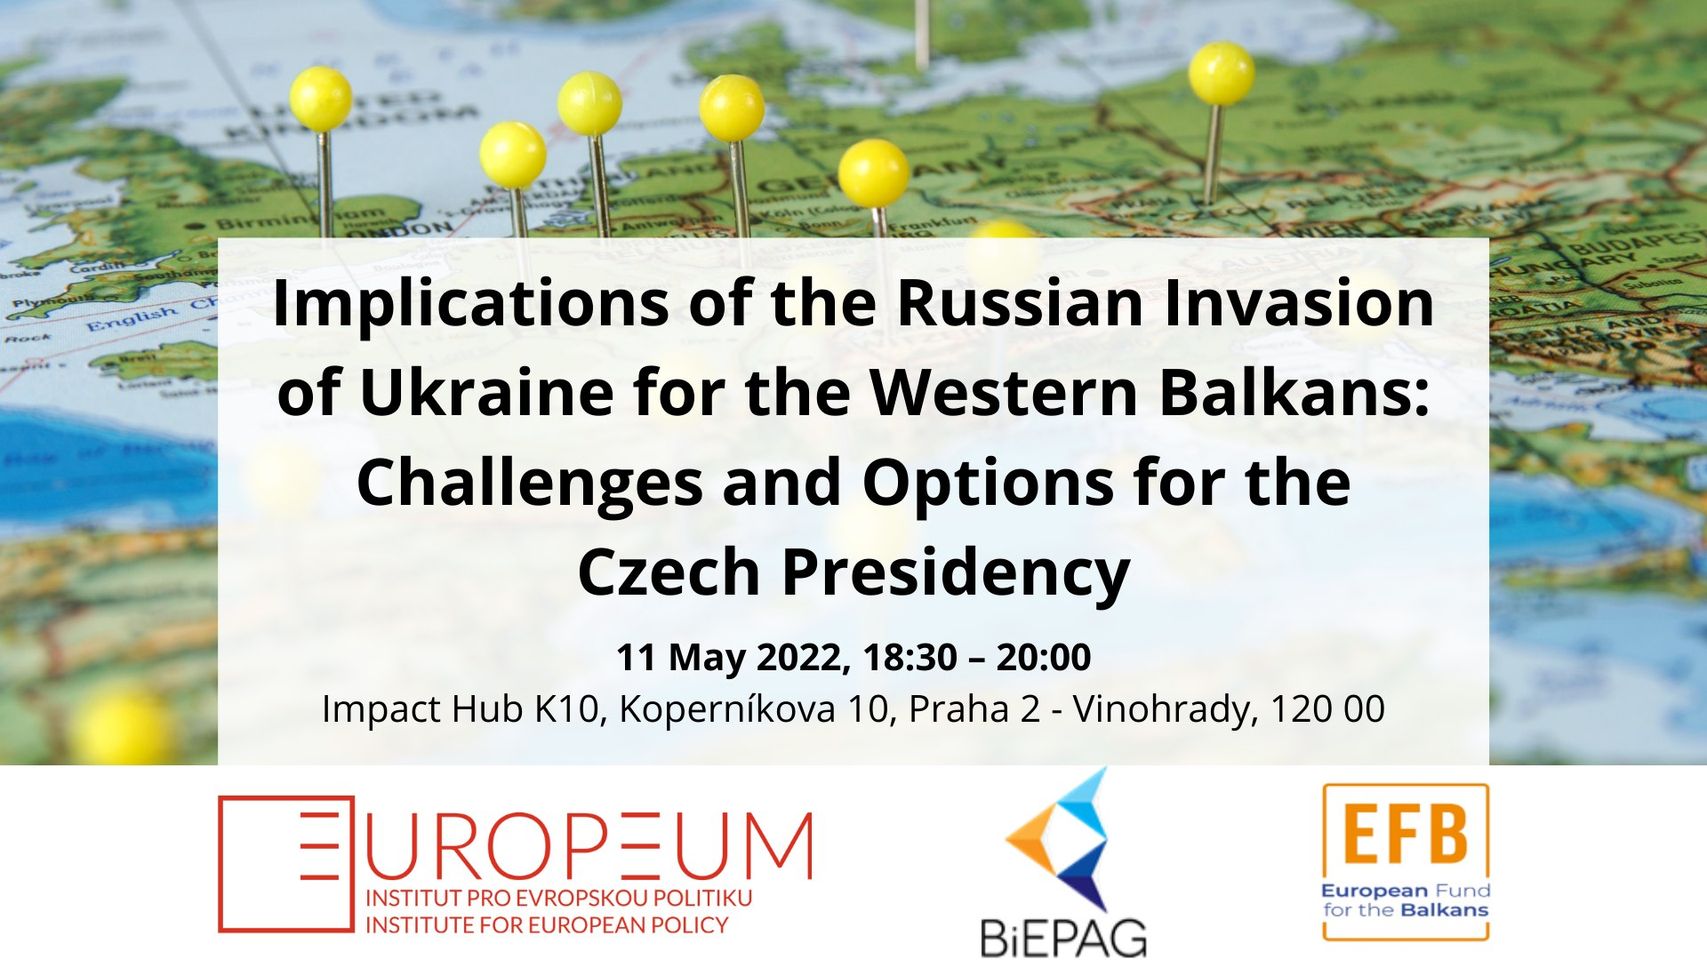 Prague, May 11: Implications of the Russian Invasion of Ukraine for the Western Balkans: Challenges and Options